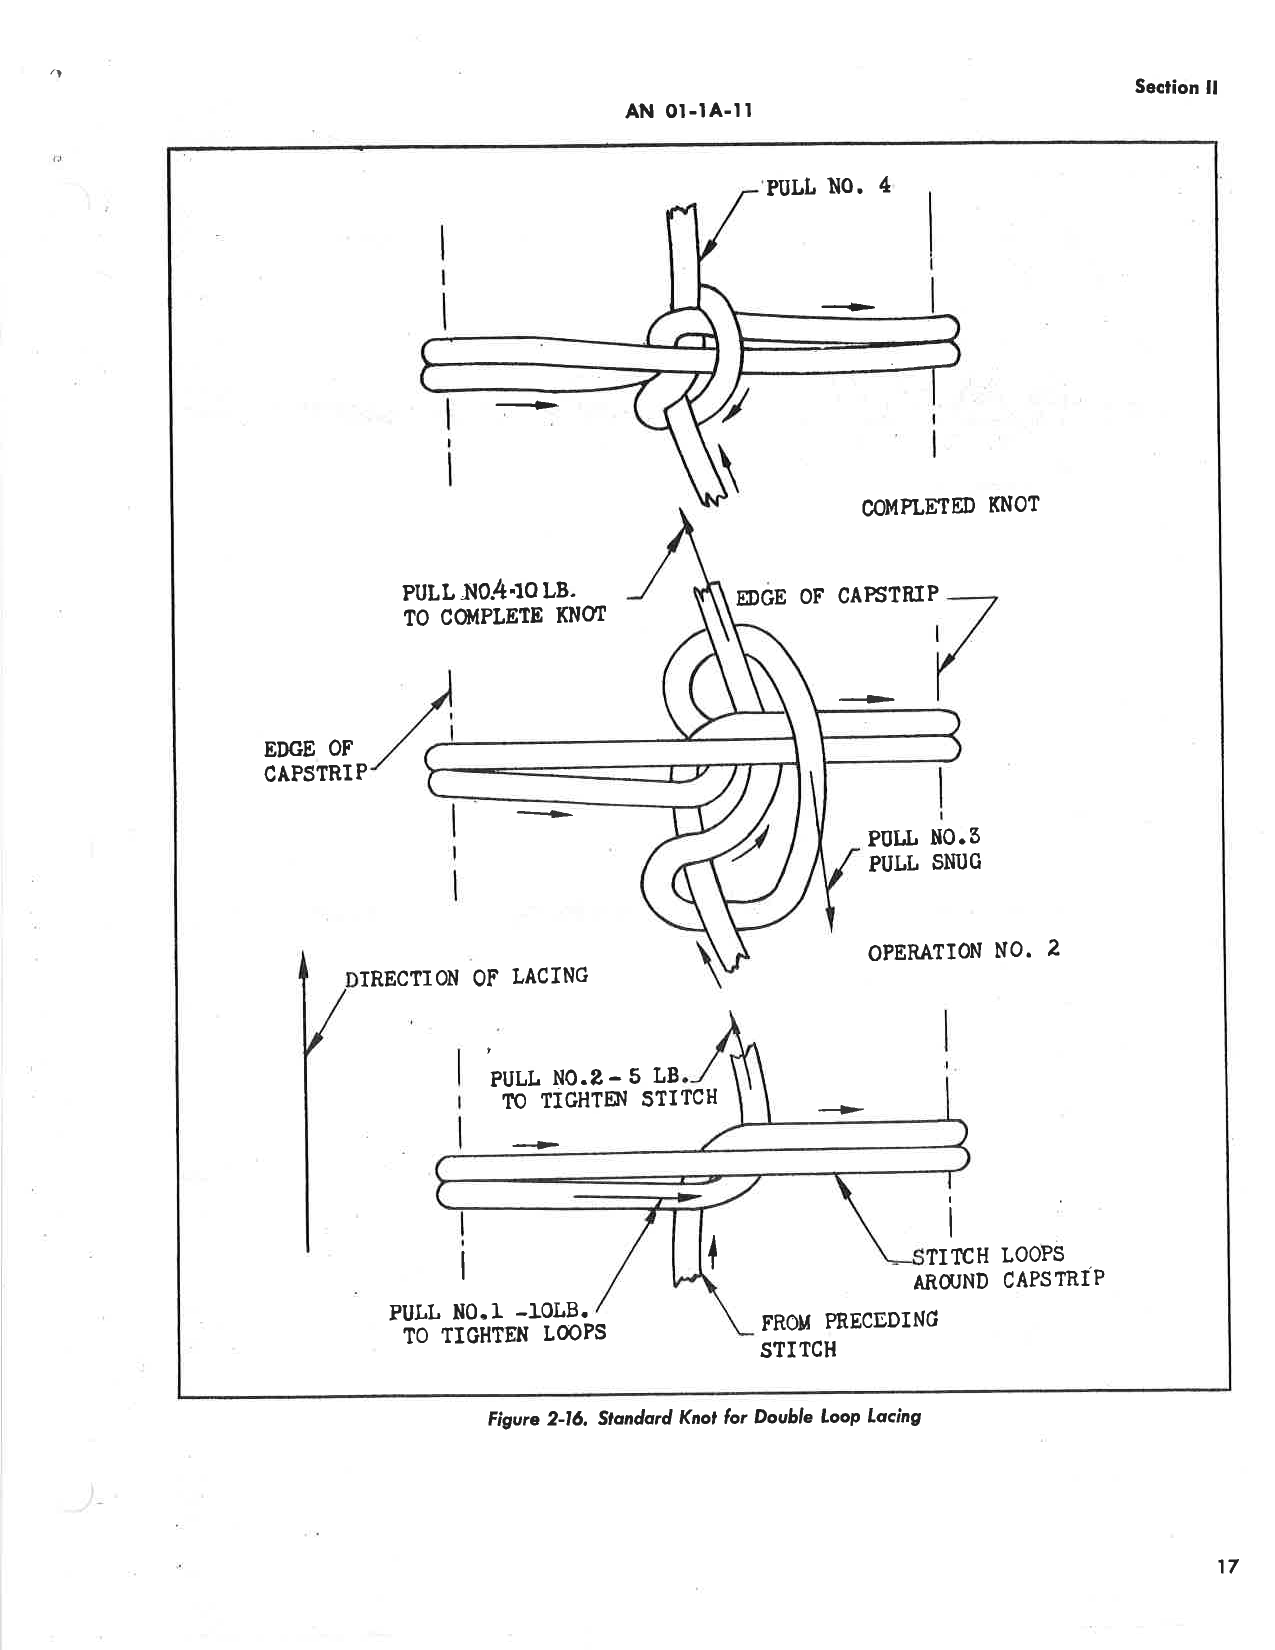 Sample page 22 from AirCorps Library document: Fabric Repair and Doping - Engineering Handbook Series for Aircraft Repair